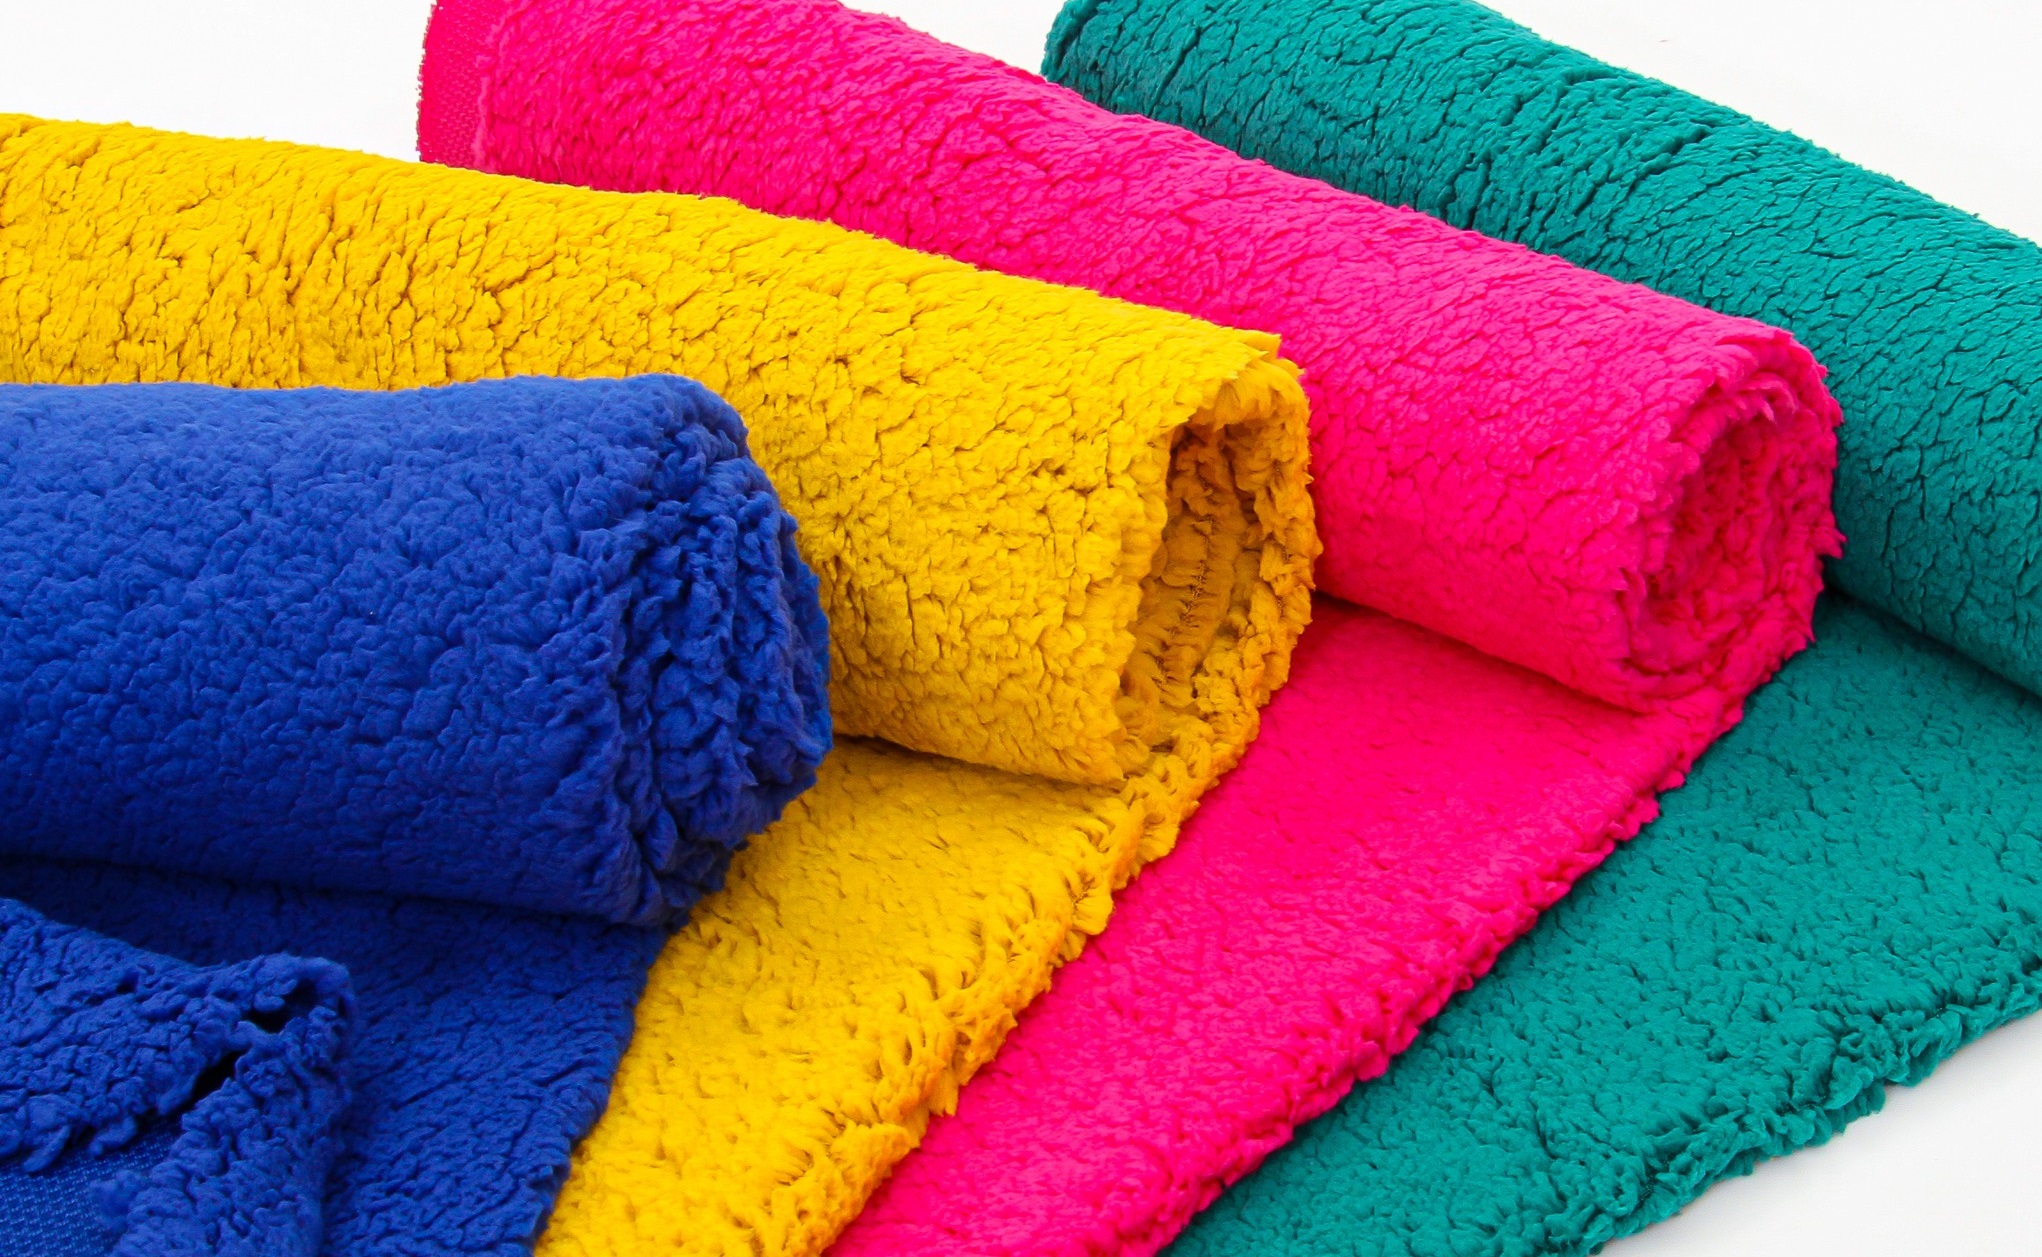 Fleece Fabric Manufacturer Everything You Need to Know Abou KINGCASON (s)